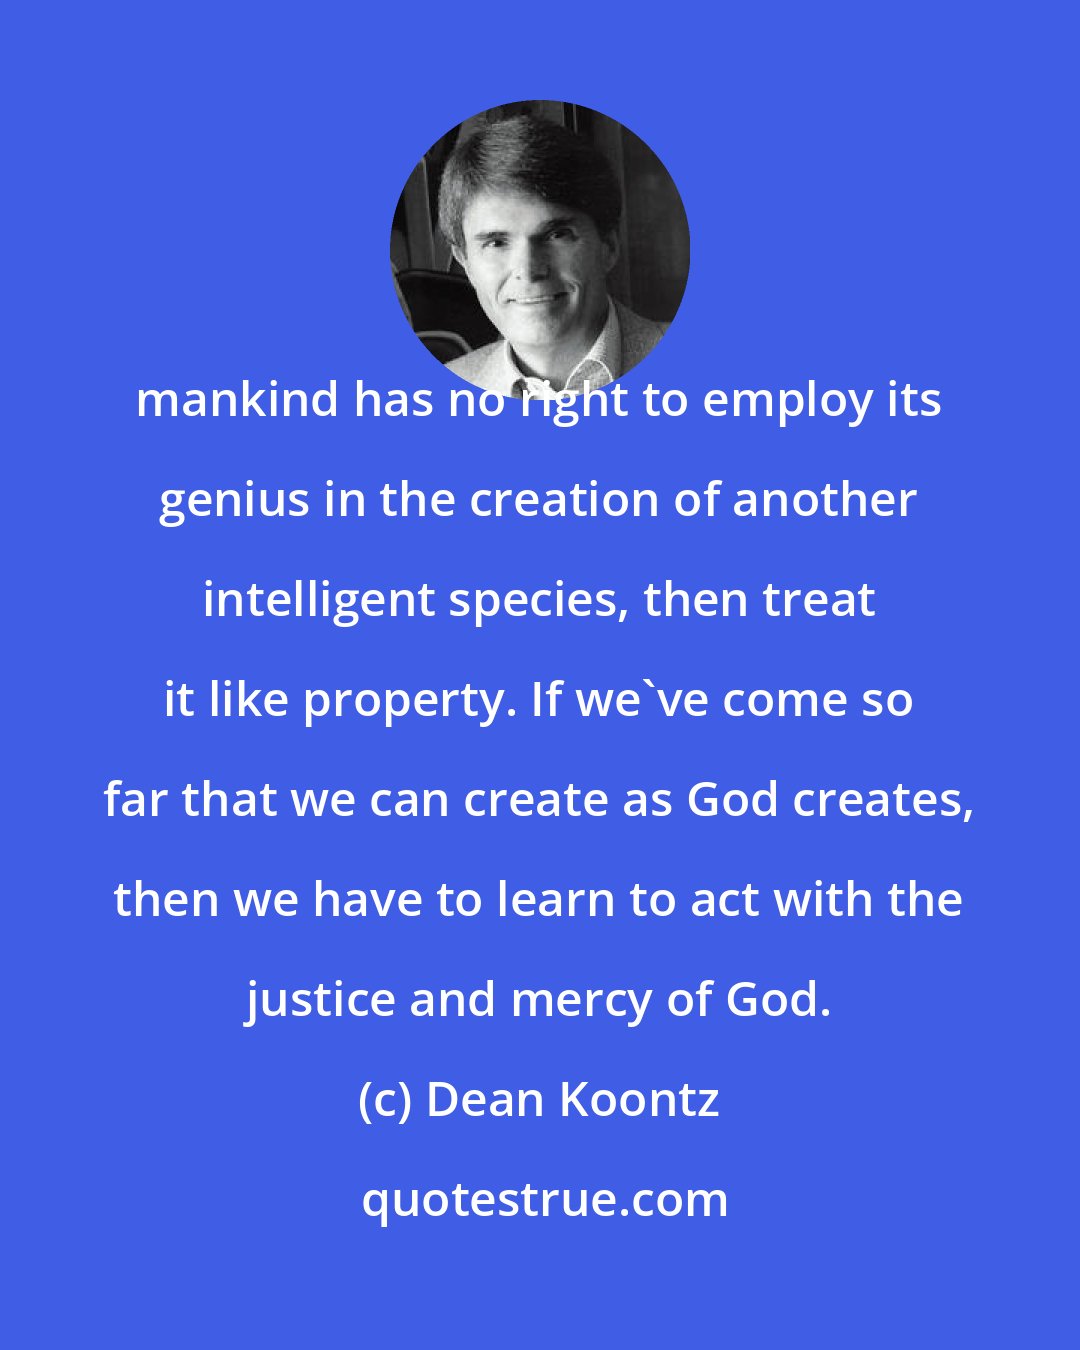 Dean Koontz: mankind has no right to employ its genius in the creation of another intelligent species, then treat it like property. If we've come so far that we can create as God creates, then we have to learn to act with the justice and mercy of God.